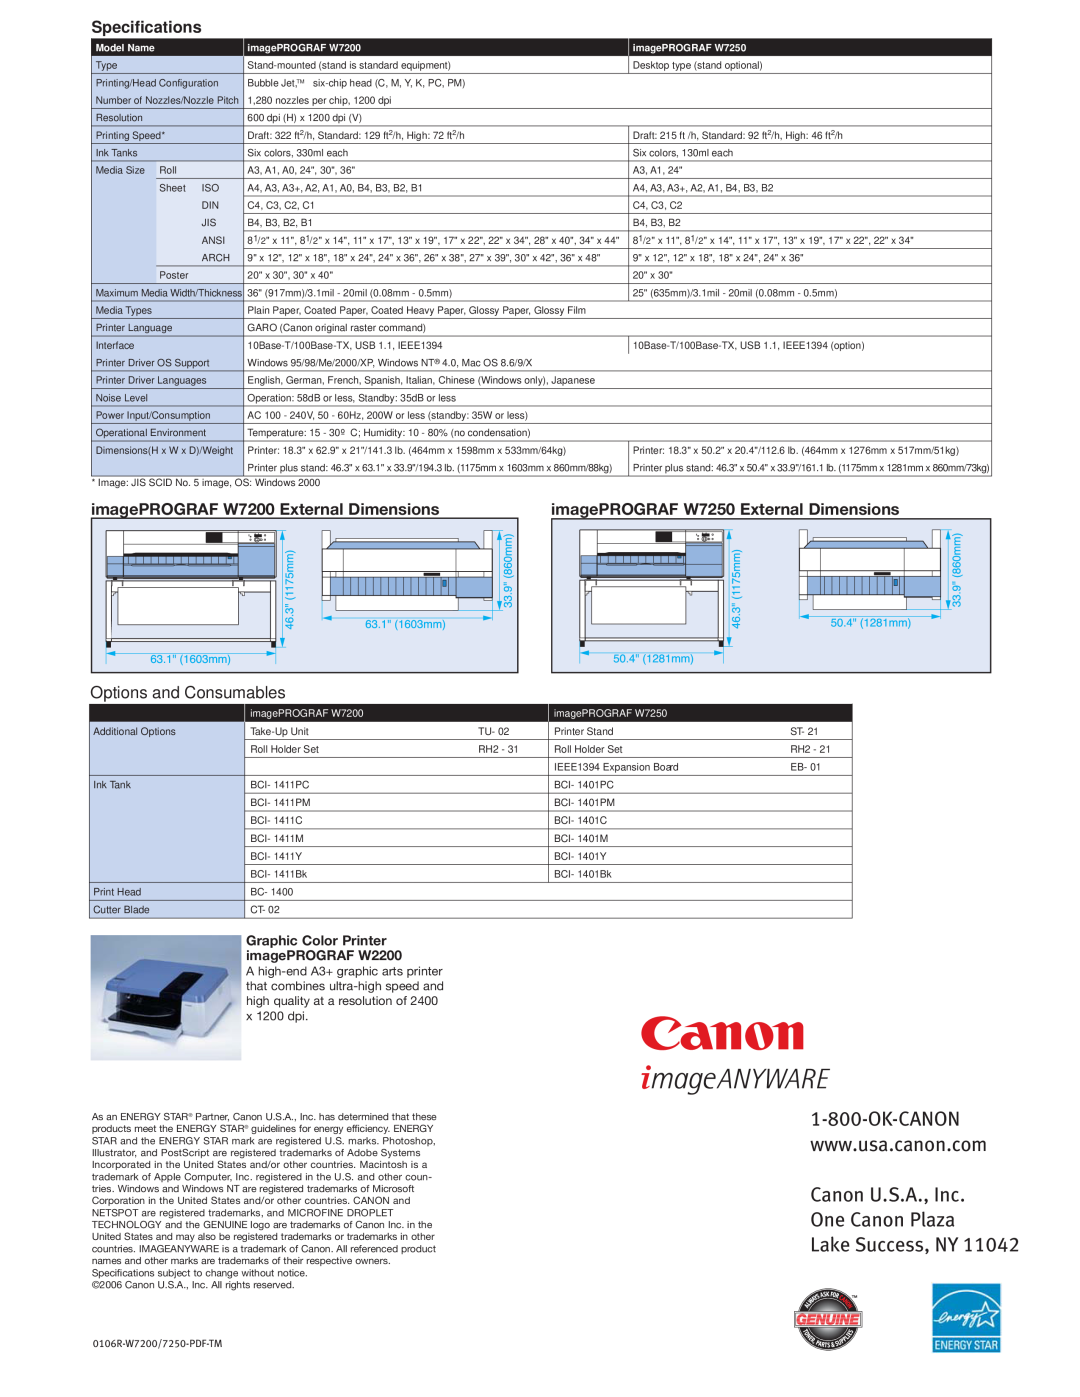 Canon W7200 manual Canon U.S.A., Inc One Canon Plaza Lake Success, NY, Options and Consumables, Specifications, Model Name 